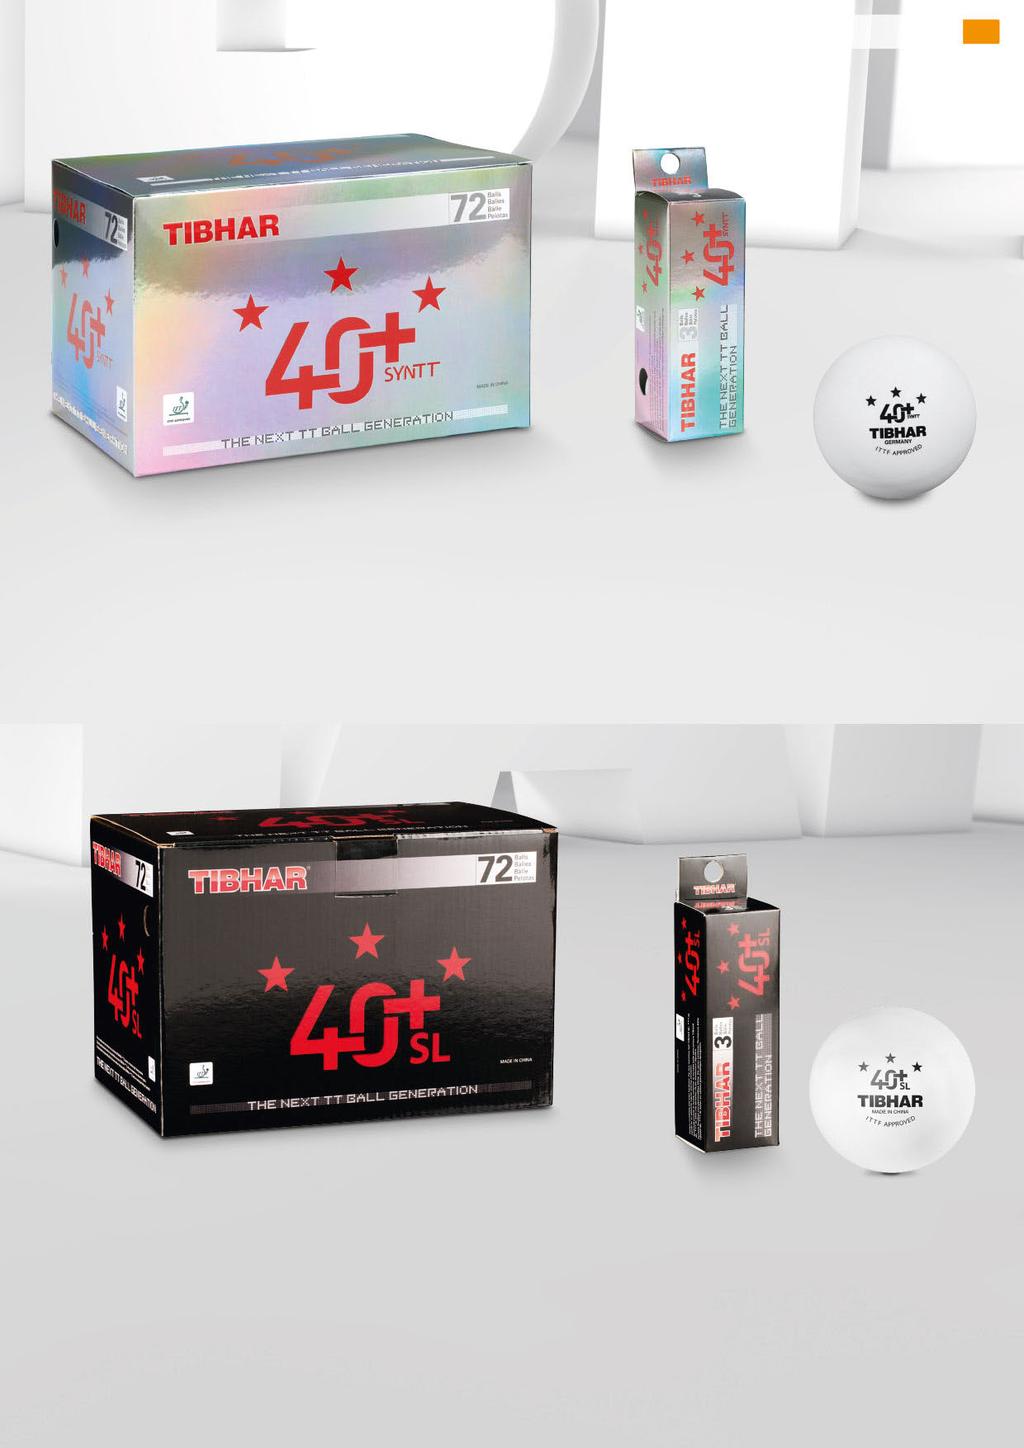 COMPETITION BALLS 53 40+ SYNTT PACK OF 72 The technology TIBHAR 40+ SYNTT the optimal roundness and hardness confer the utmost regular ball bounce Celluloid-free Available in white 40+ SYNTT PACK OF